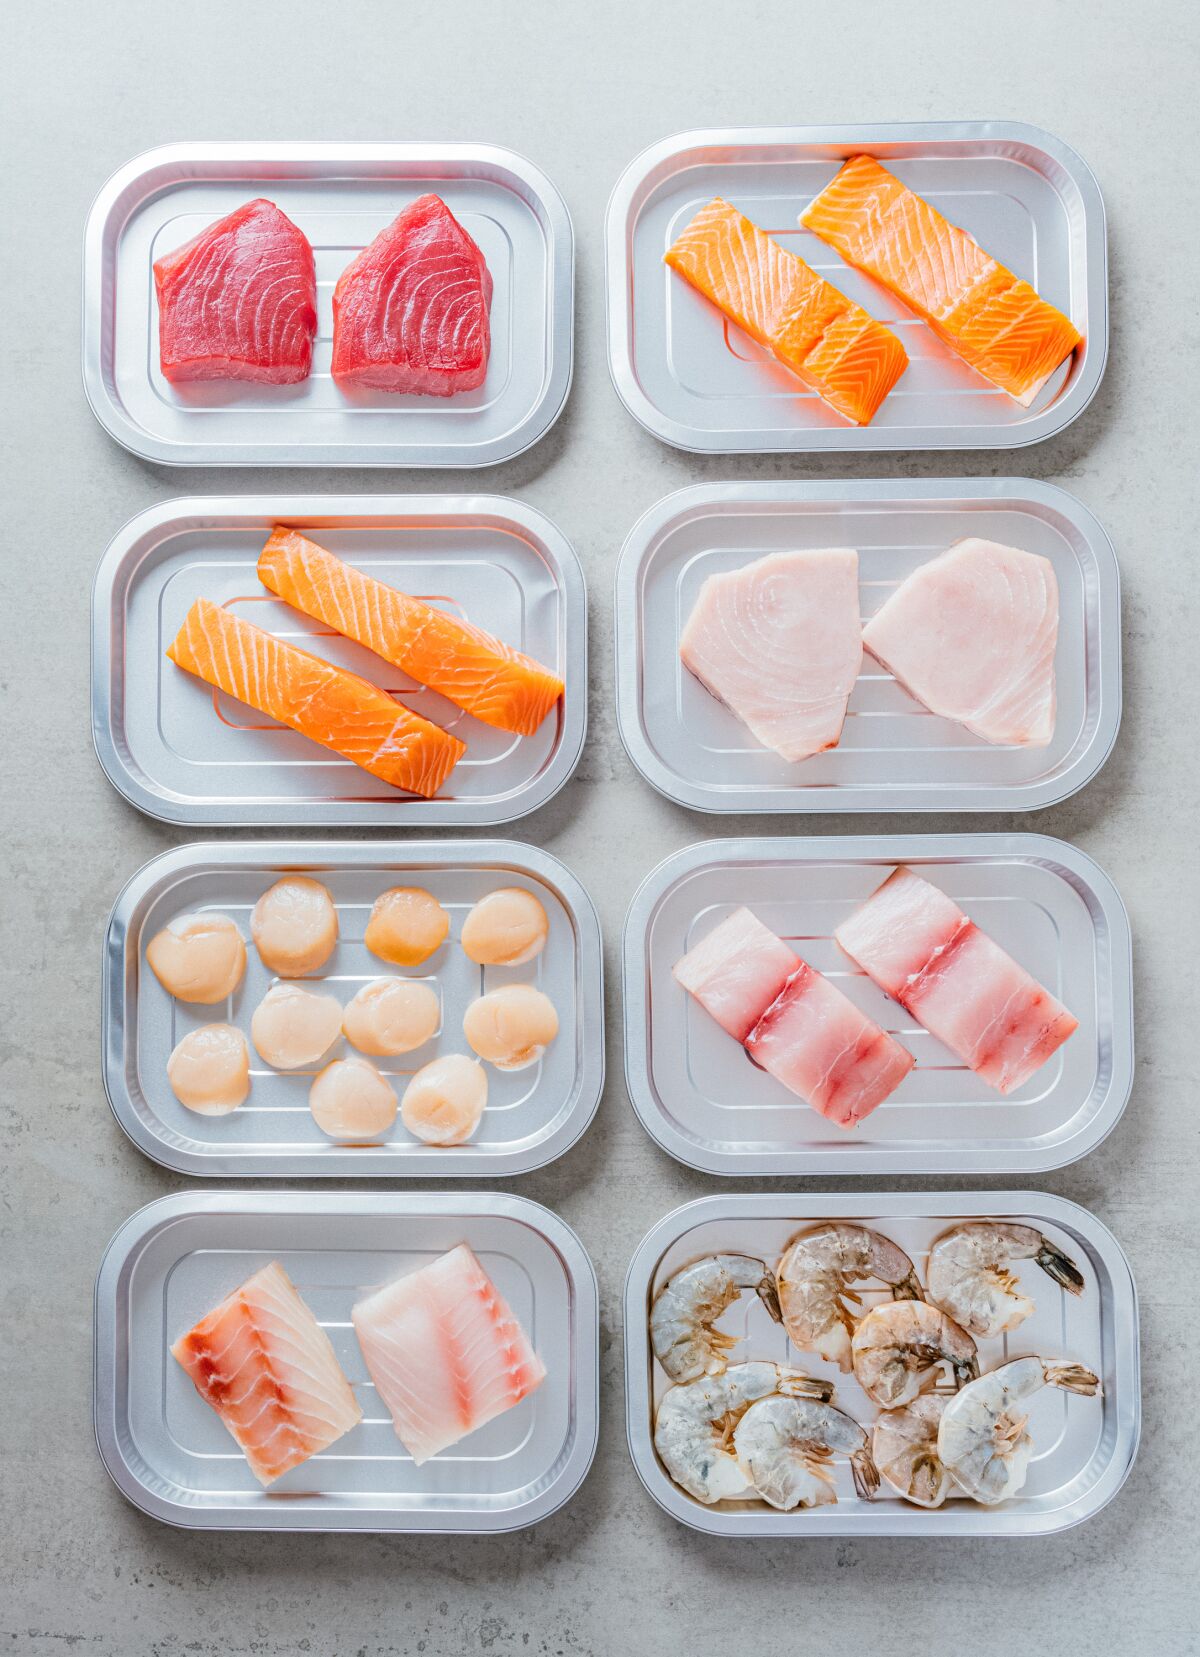 Vacuum-sealed PureFish seafood trays are rolling out in several San Diego supermarkets this summer.